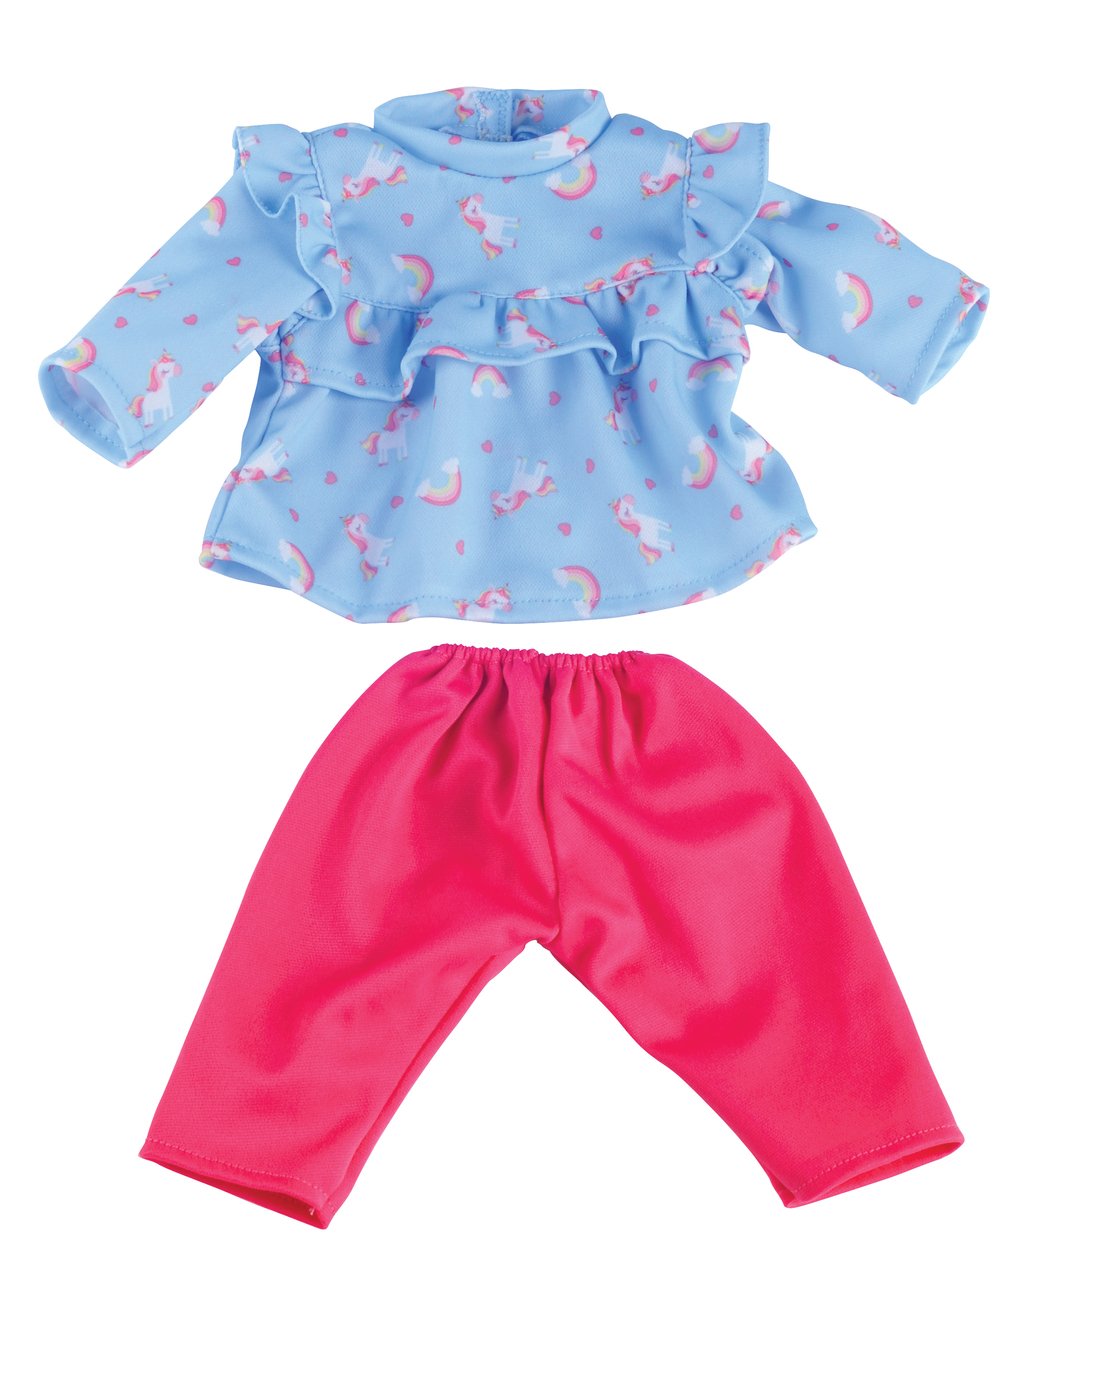 chad valley baby clothes